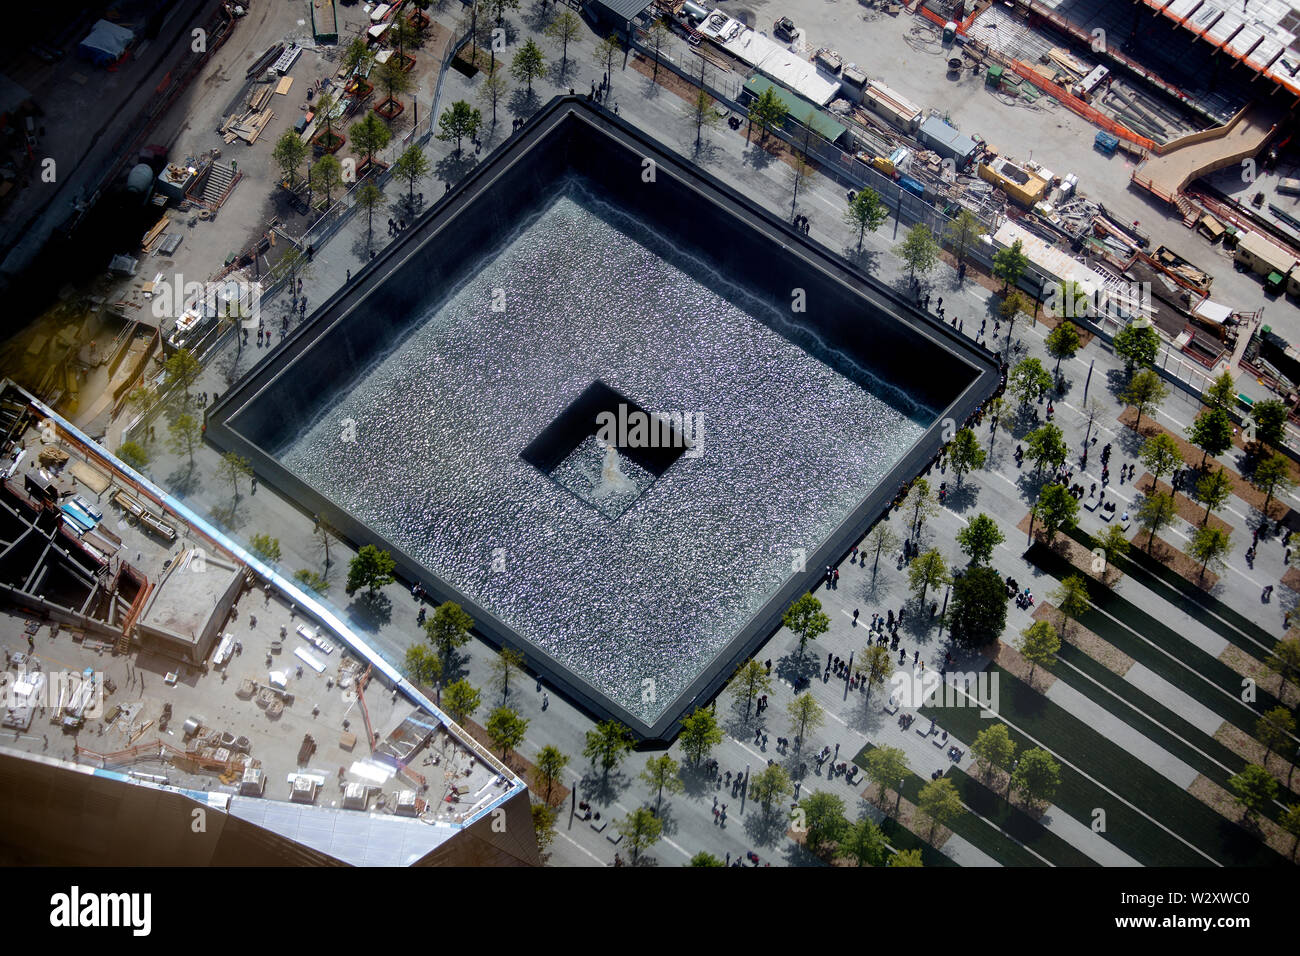 The reflecting pools in the 9/11 Memorial Park at Ground Zero as seen from the 73rd floor of the WTC Tower under construction. Stock Photo